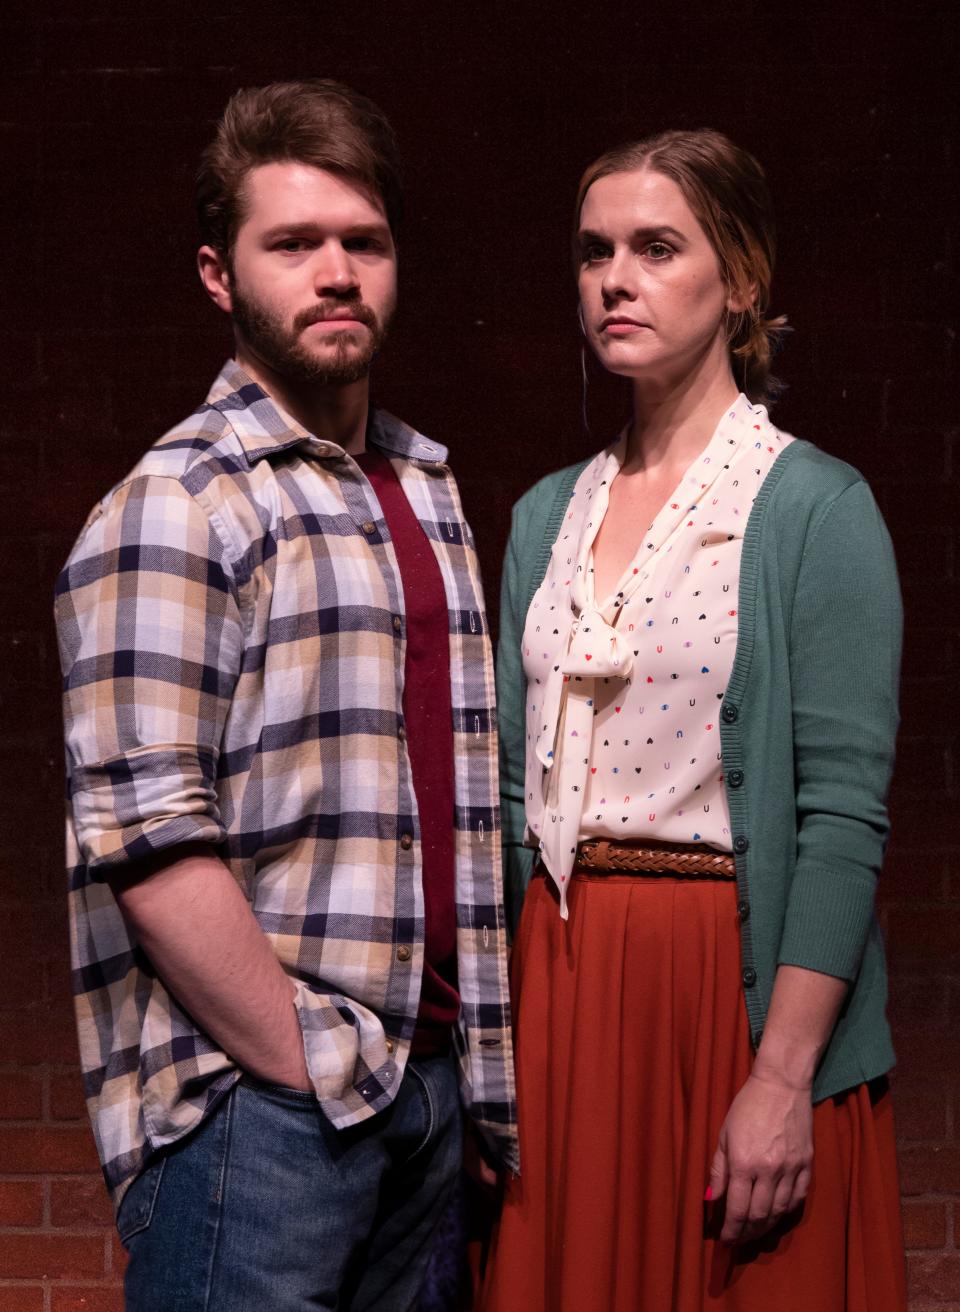 Alexander Stuart and Rachel Moulton were about to open in Etan Frankel’s play “Paralyzed” at Florida Studio Theatre when the pandemic forced theaters to shutdown last year. They will return in the play as part of FST’s Stage III season.